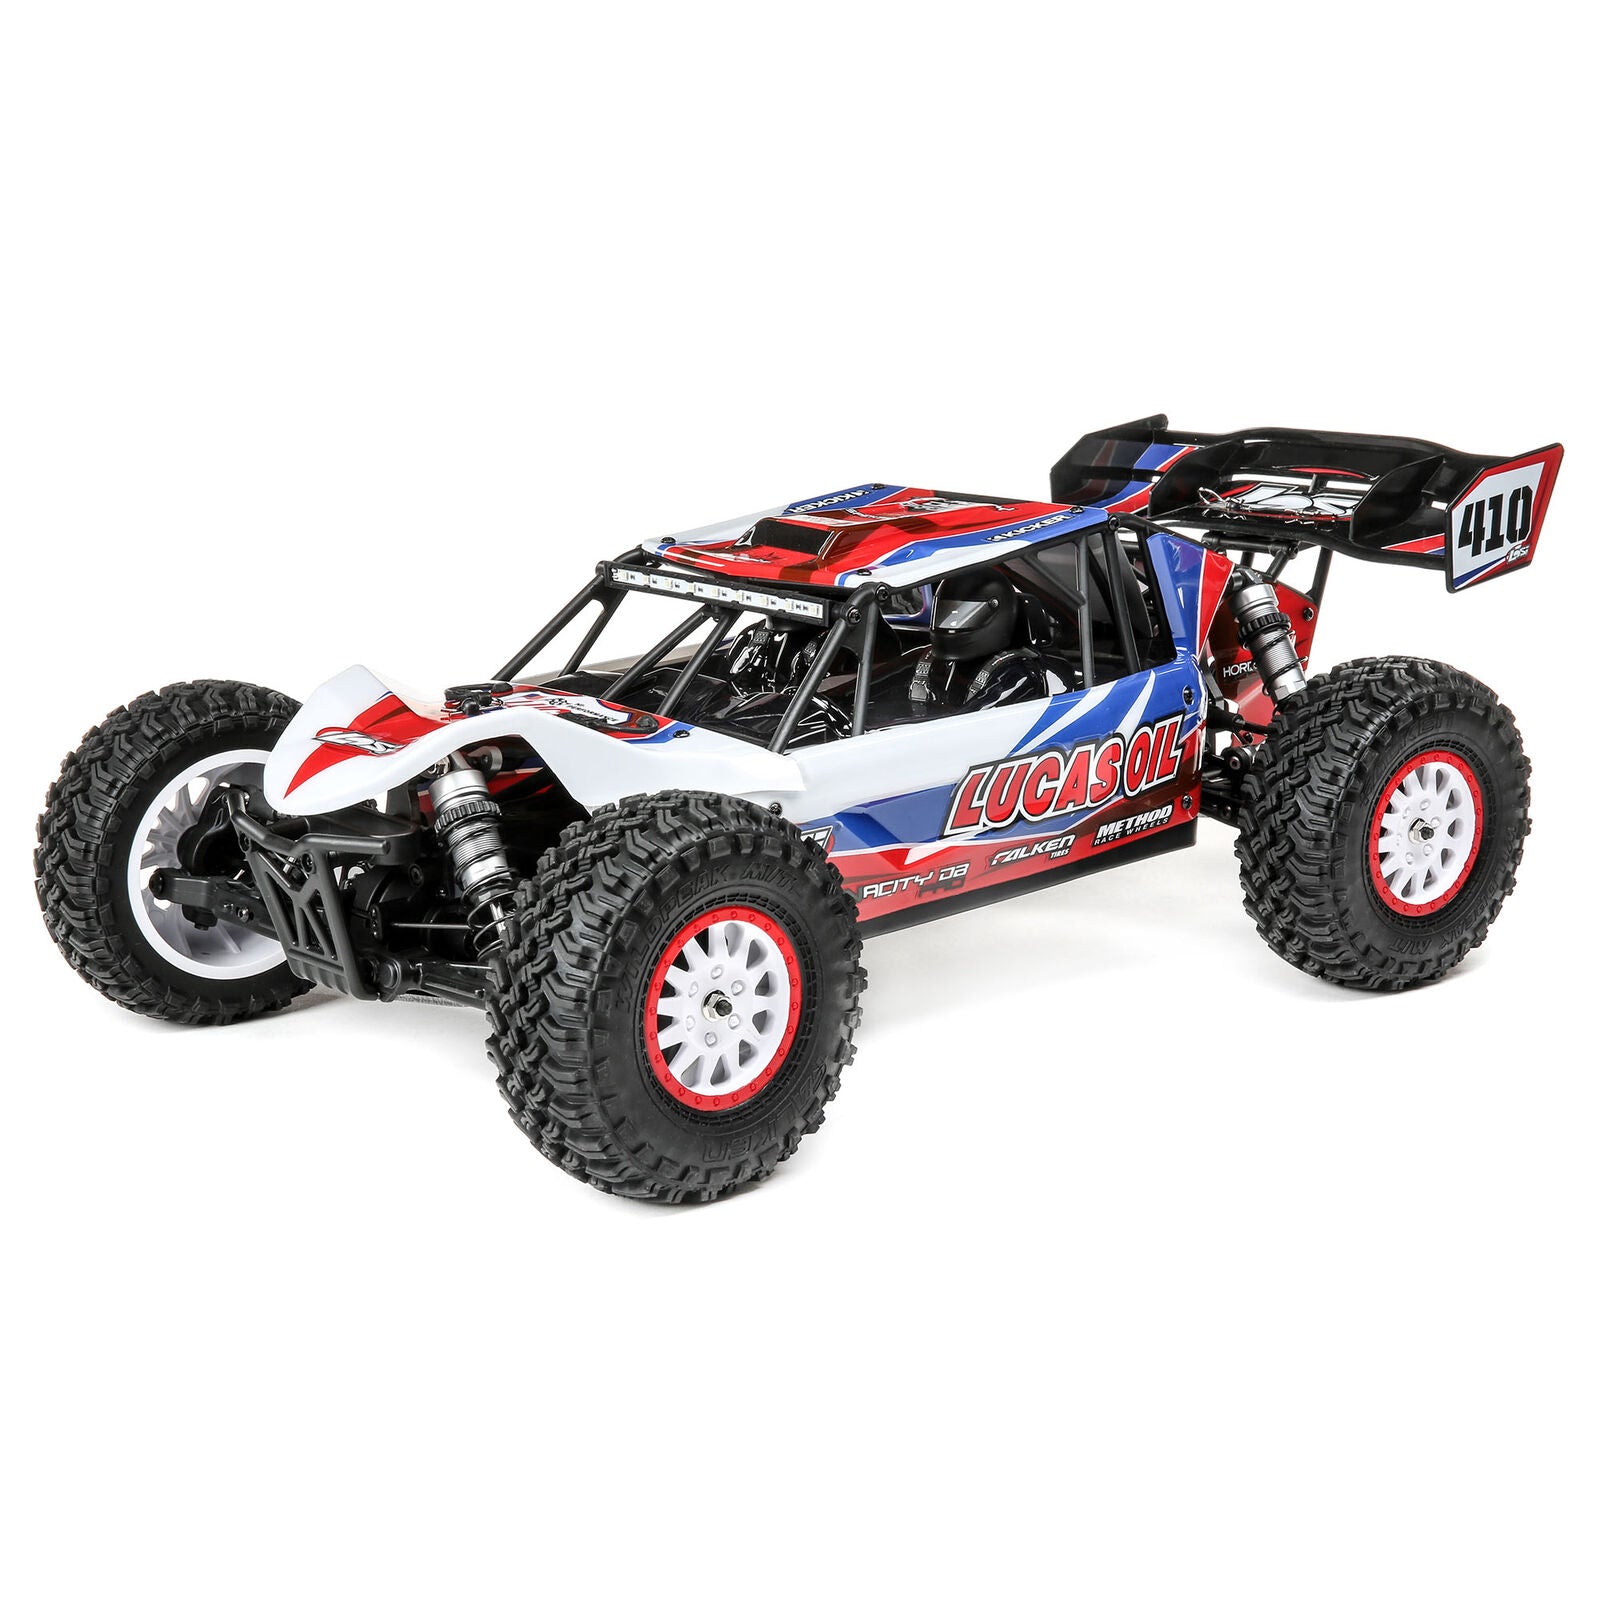 LOSI LOS03027T1 1/10 Tenacity DB Pro 4WD Desert Buggy Brushless RTR with Smart, Lucas Oil